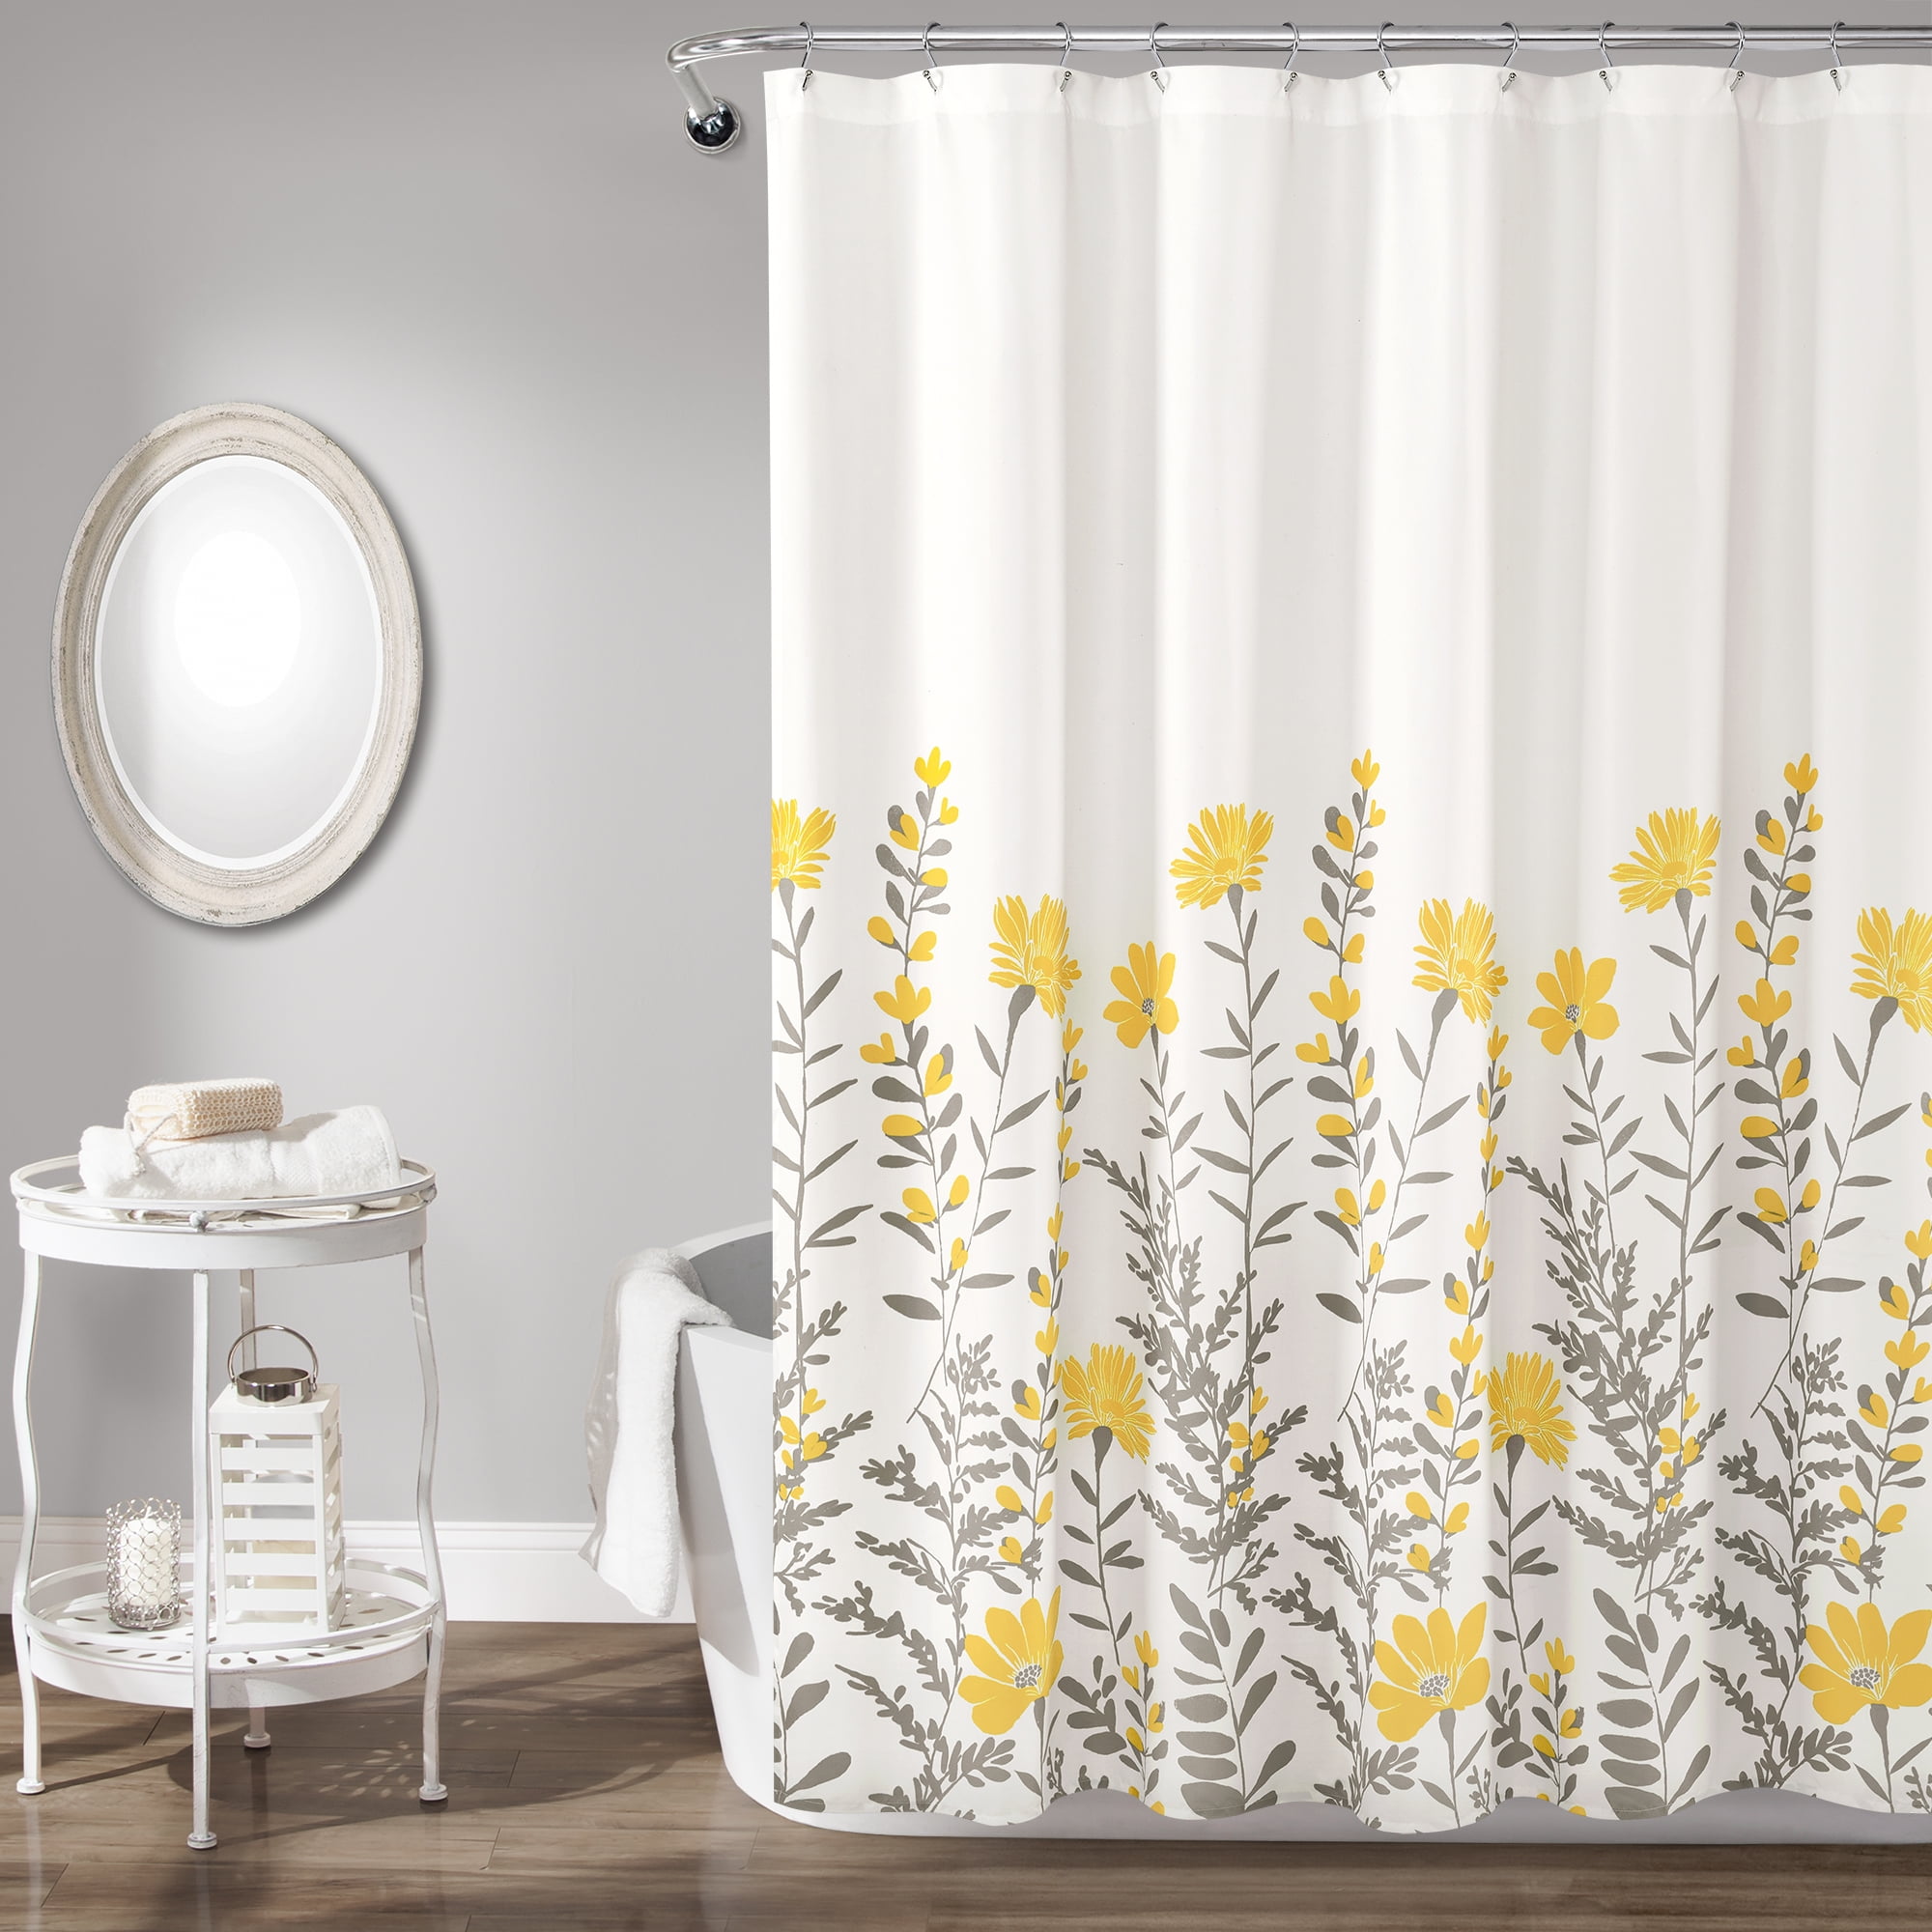 Yellow White Squares 3D Shower Curtain Waterproof Fabric Bathroom Decoration 